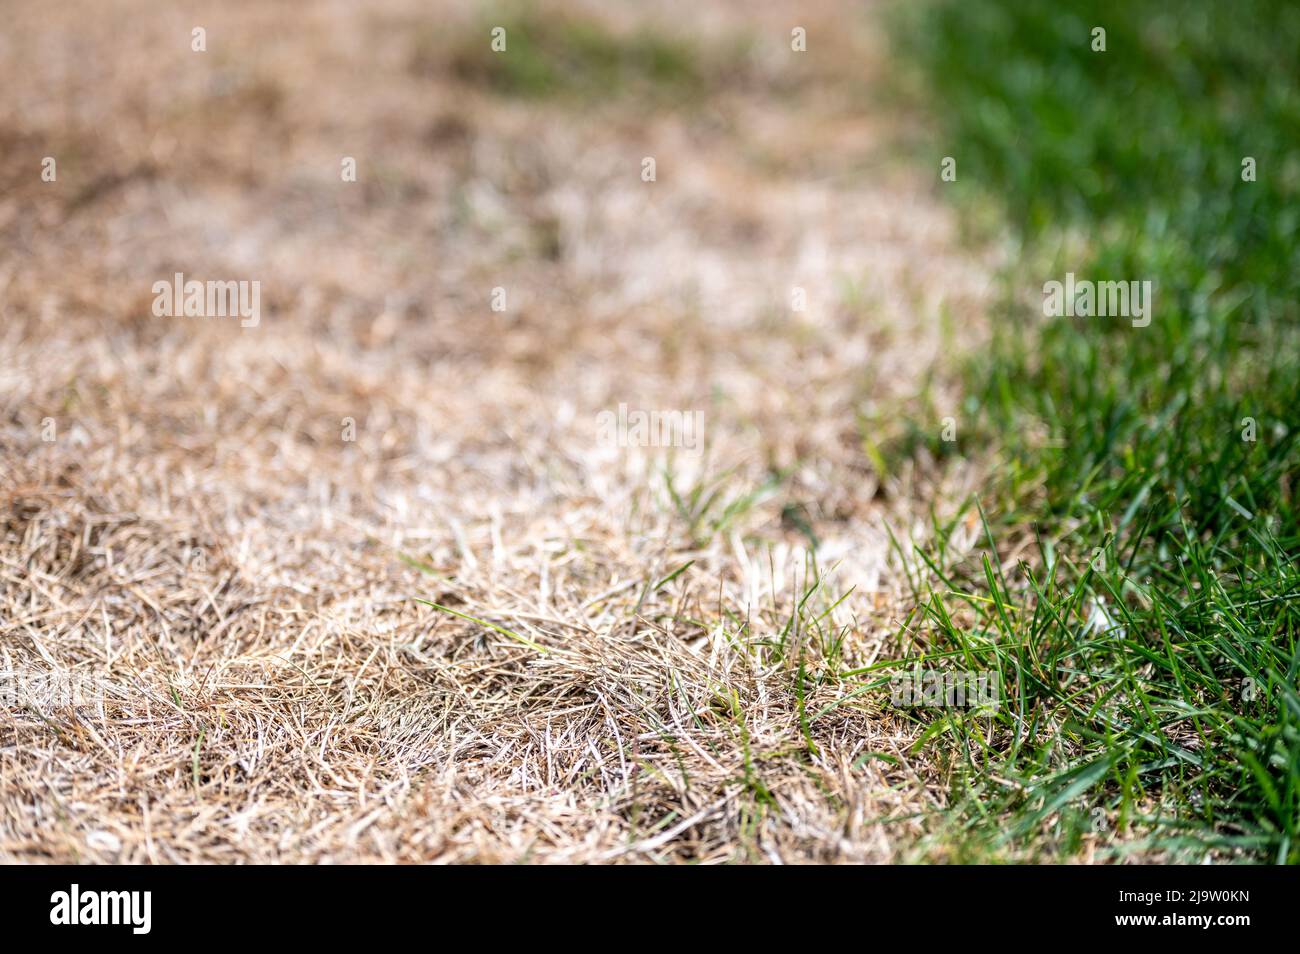 Visible distinction between healthy lawn and chemical burned grass.  Stock Photo